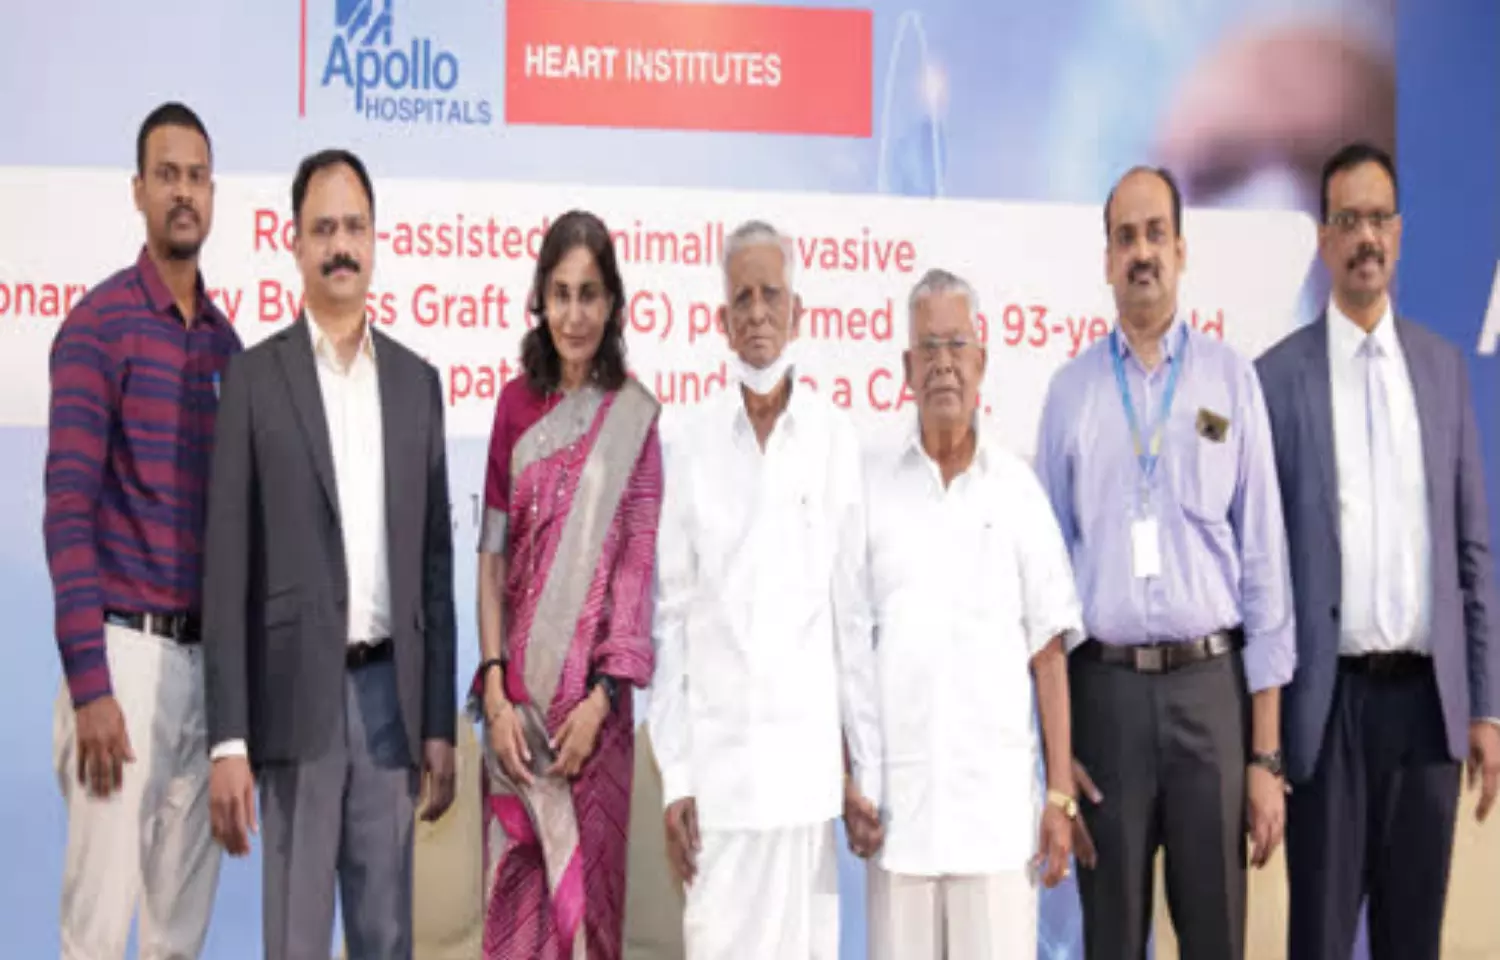 Robot-Assisted Cardiac Surgery on 93-year-old patient at Apollo Hospital Chennai